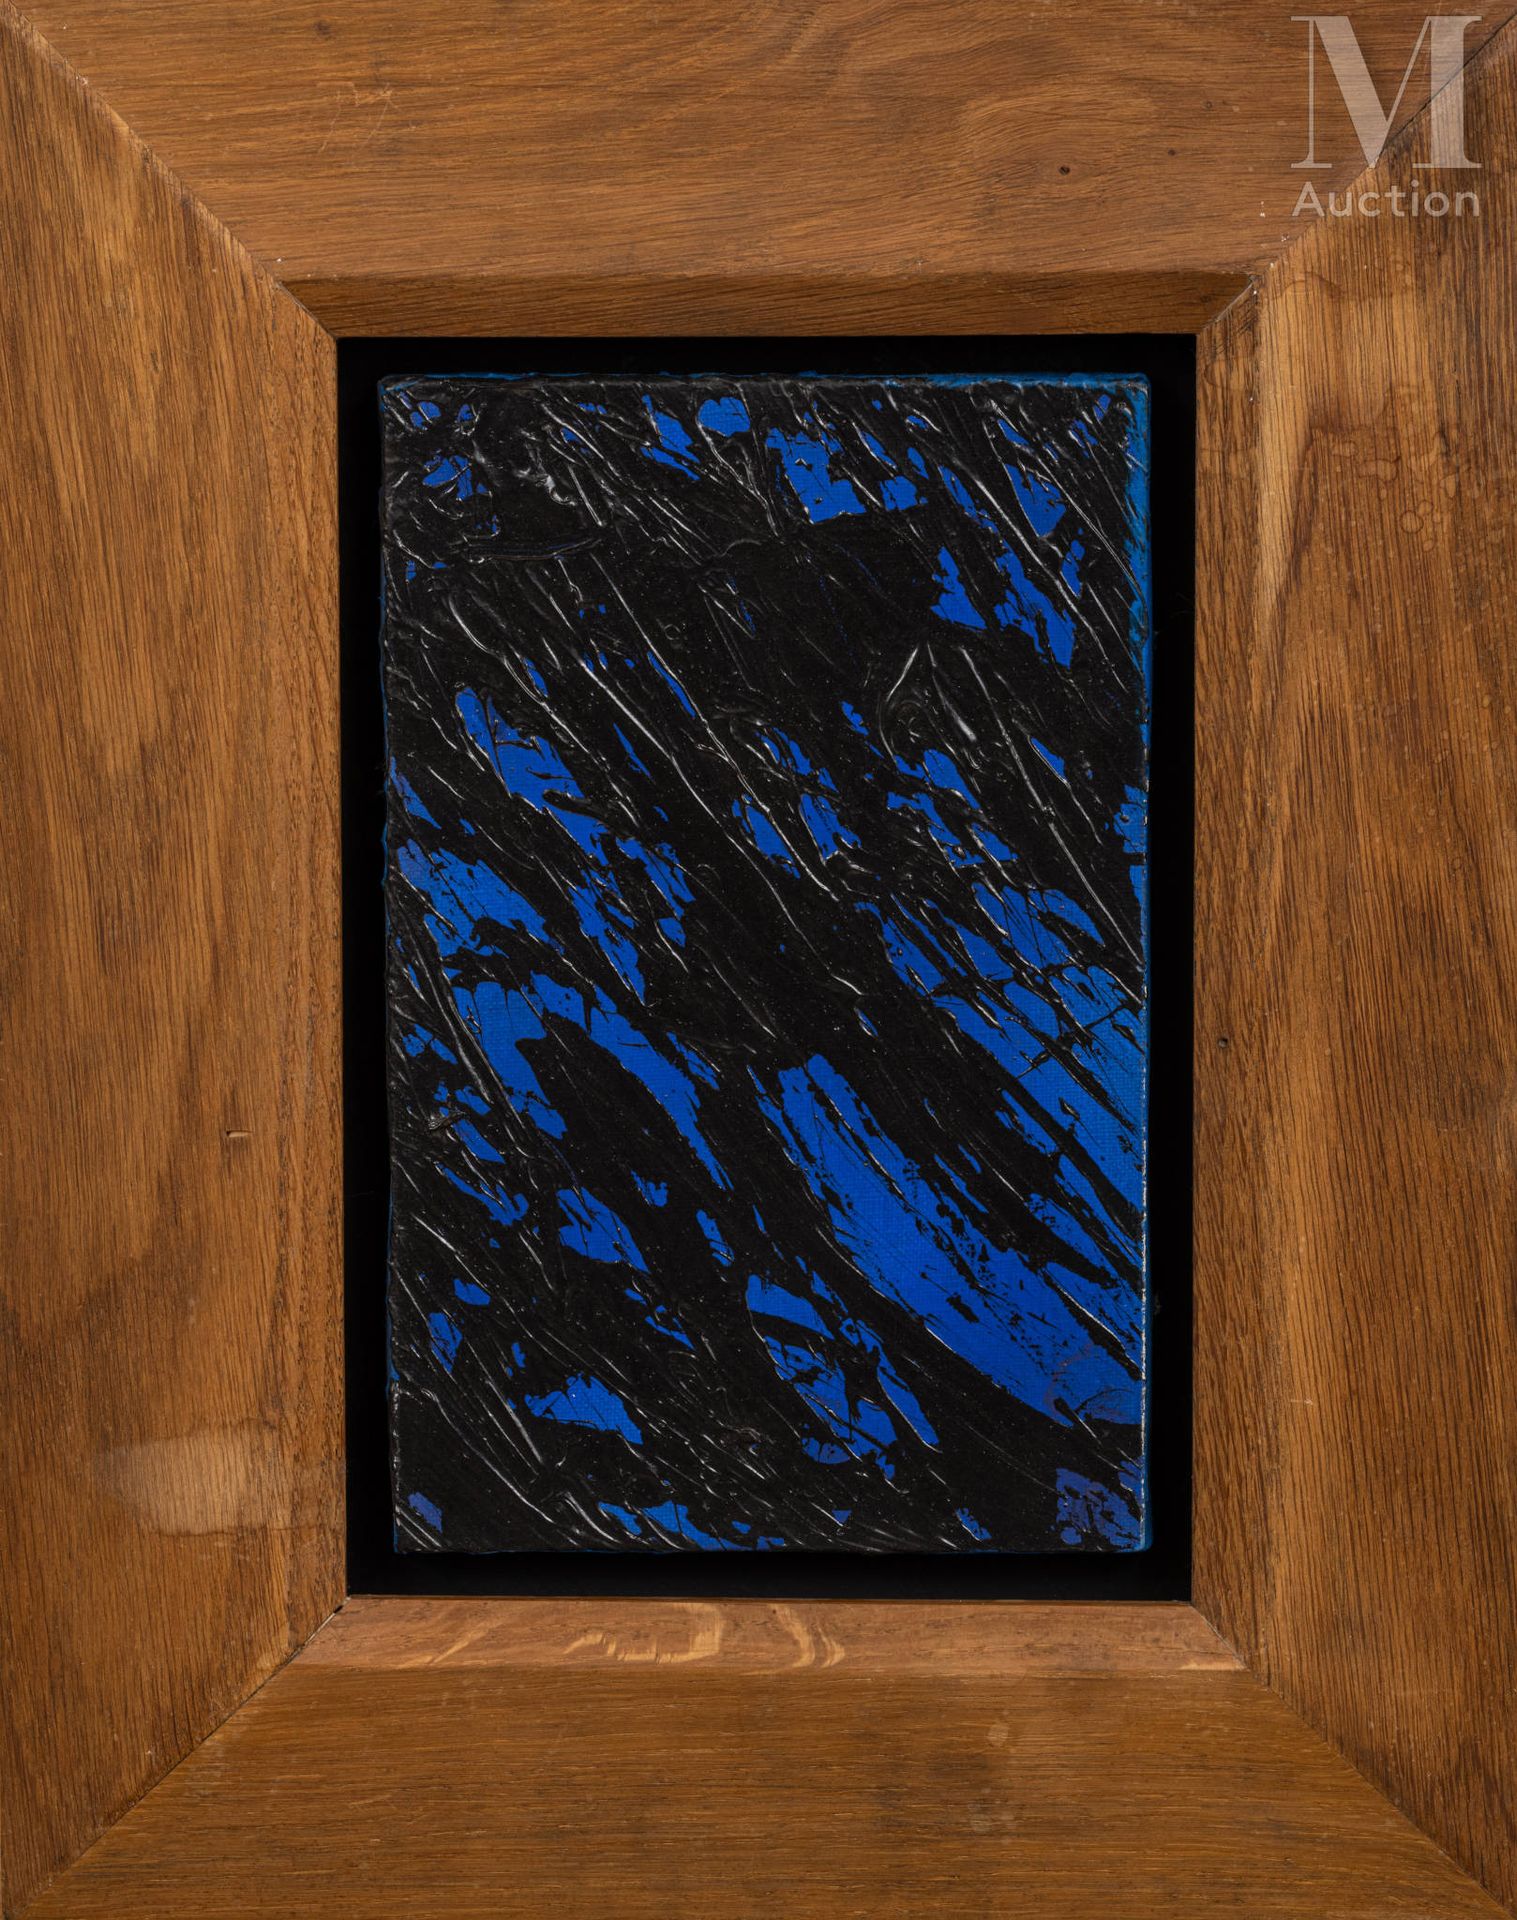 Hans HARTUNG (1904-1989) T1982- E28, 1982

Acrylic on canvas signed, dated and d&hellip;